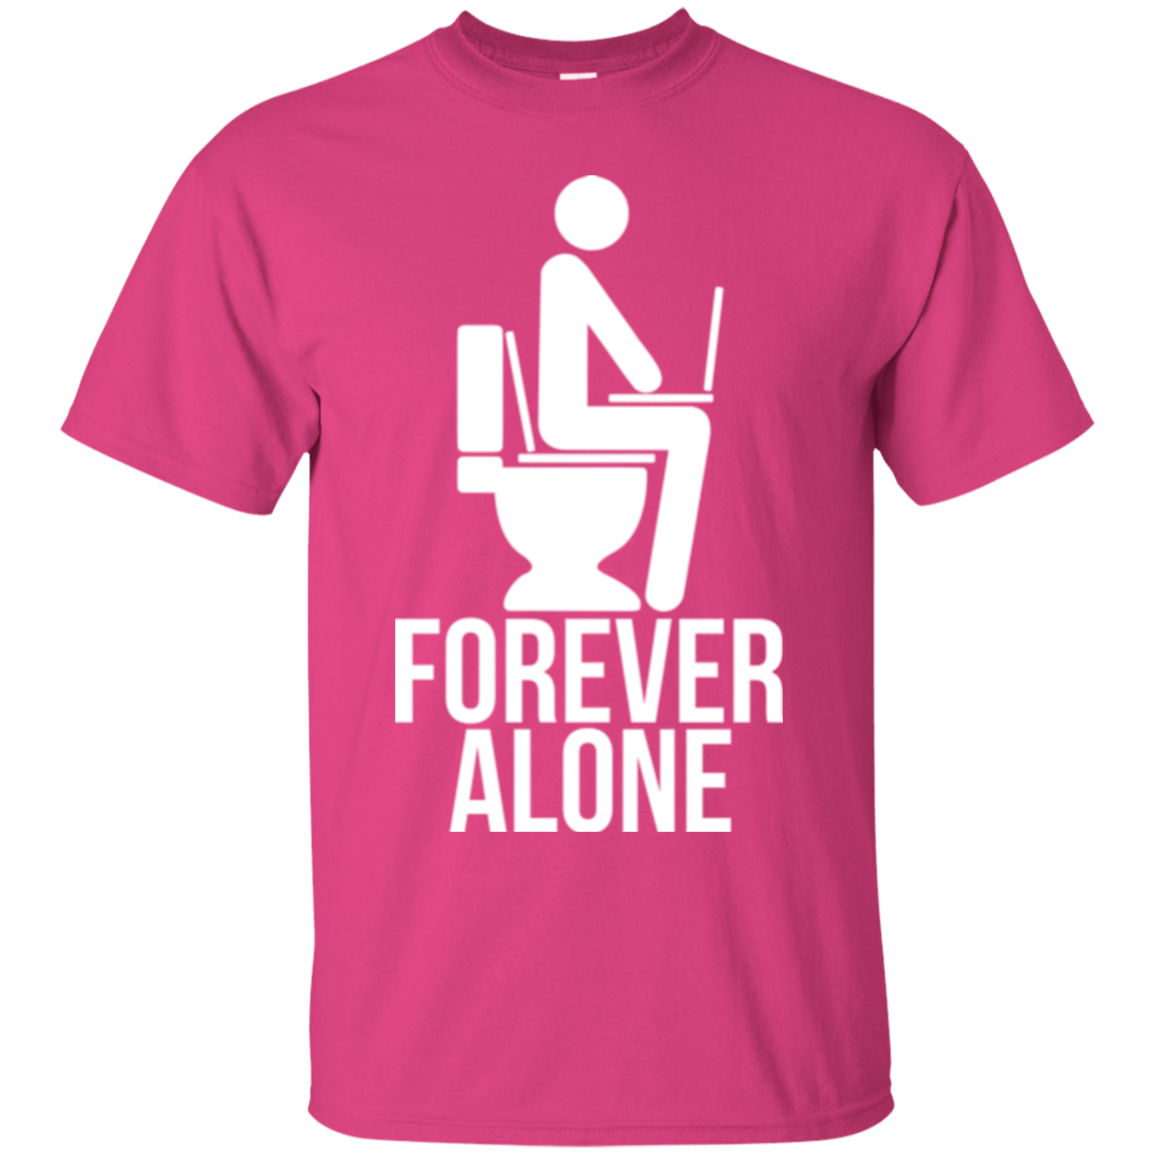 T-Shirts Heliconia / Small Forever alone T-Shirt